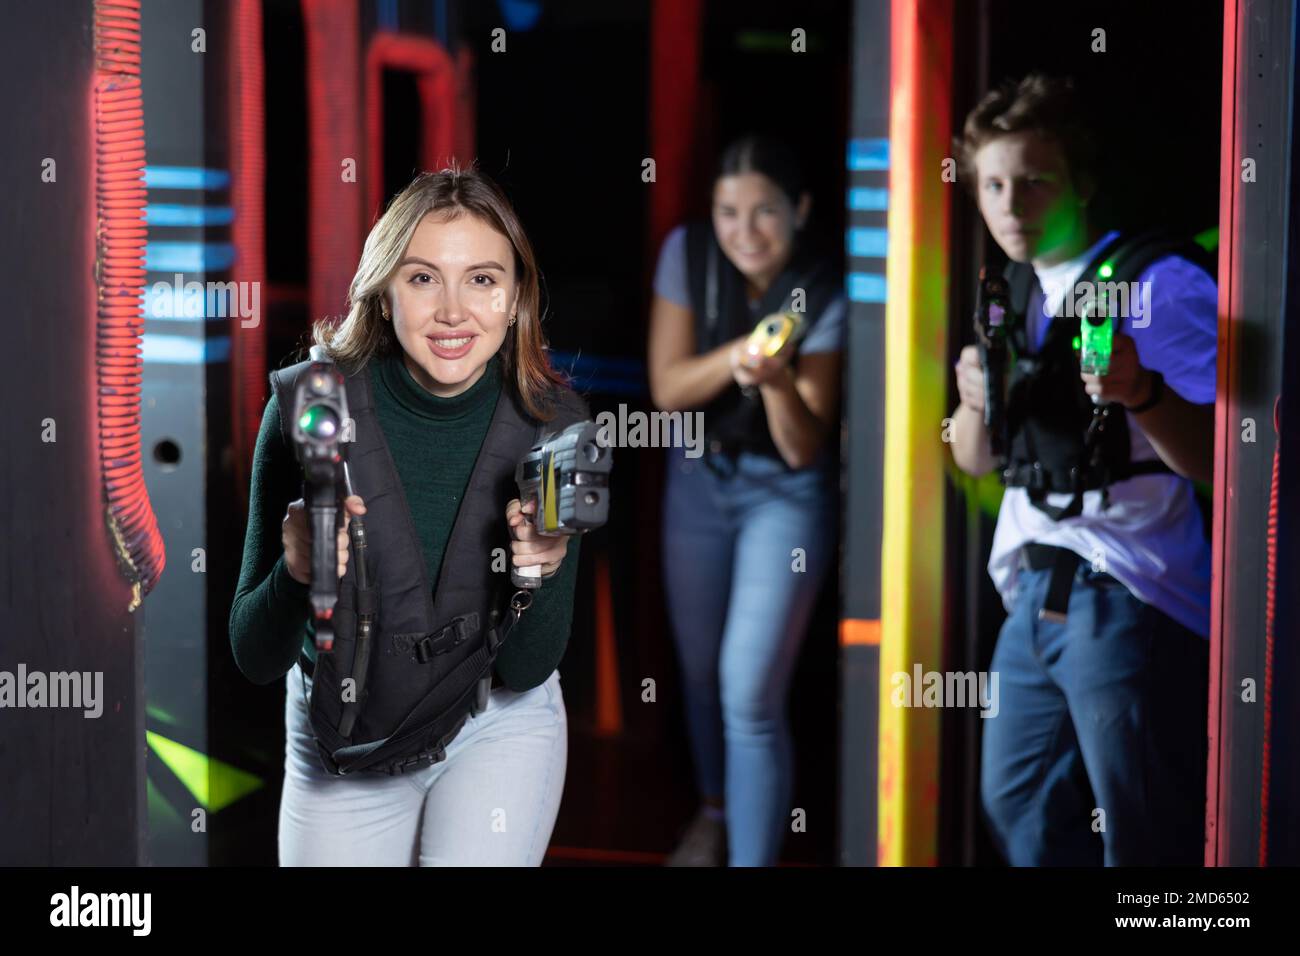 Young lady having fun playing lasertag in arena Stock Photo